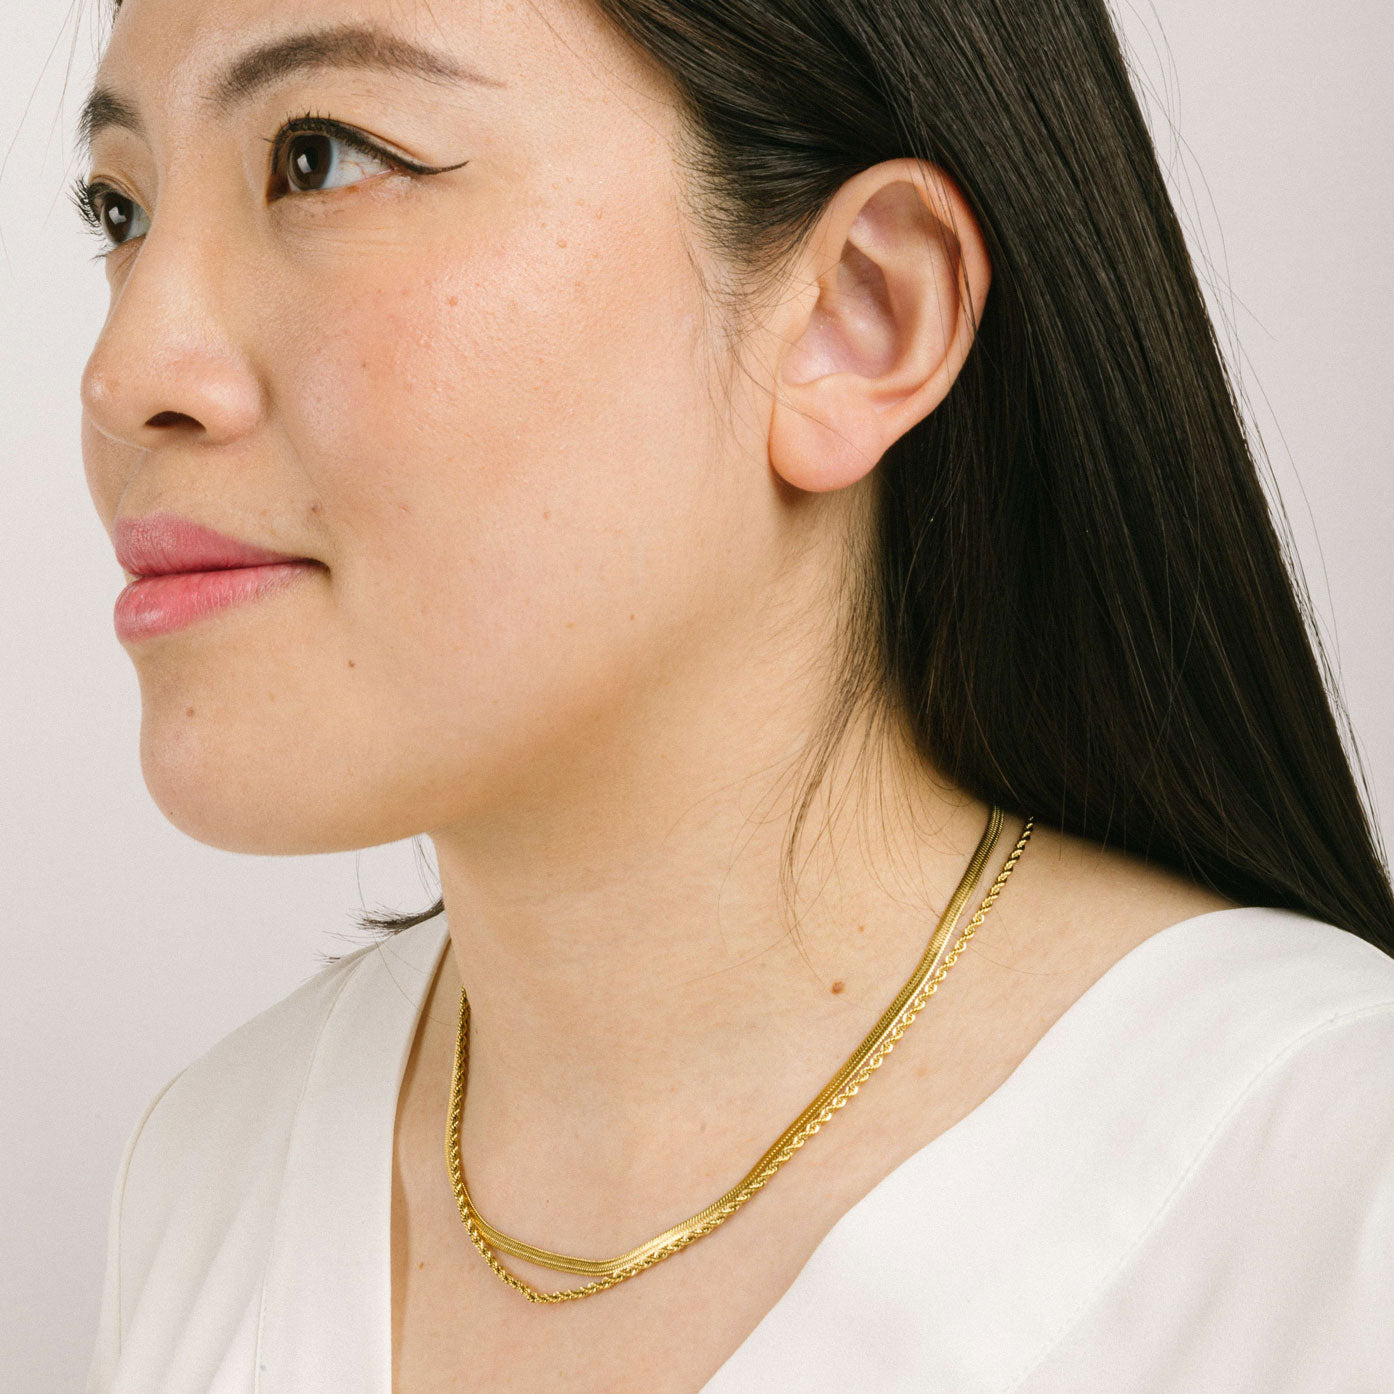 A model wearing the Twisted Double Layered Necklace consists of 14K Gold Plated Stainless Steel, providing water resistance, non-tarnishing, and leading, nickel, and cadmium free properties. Additionally, it is adjustable, though only one necklace is included.